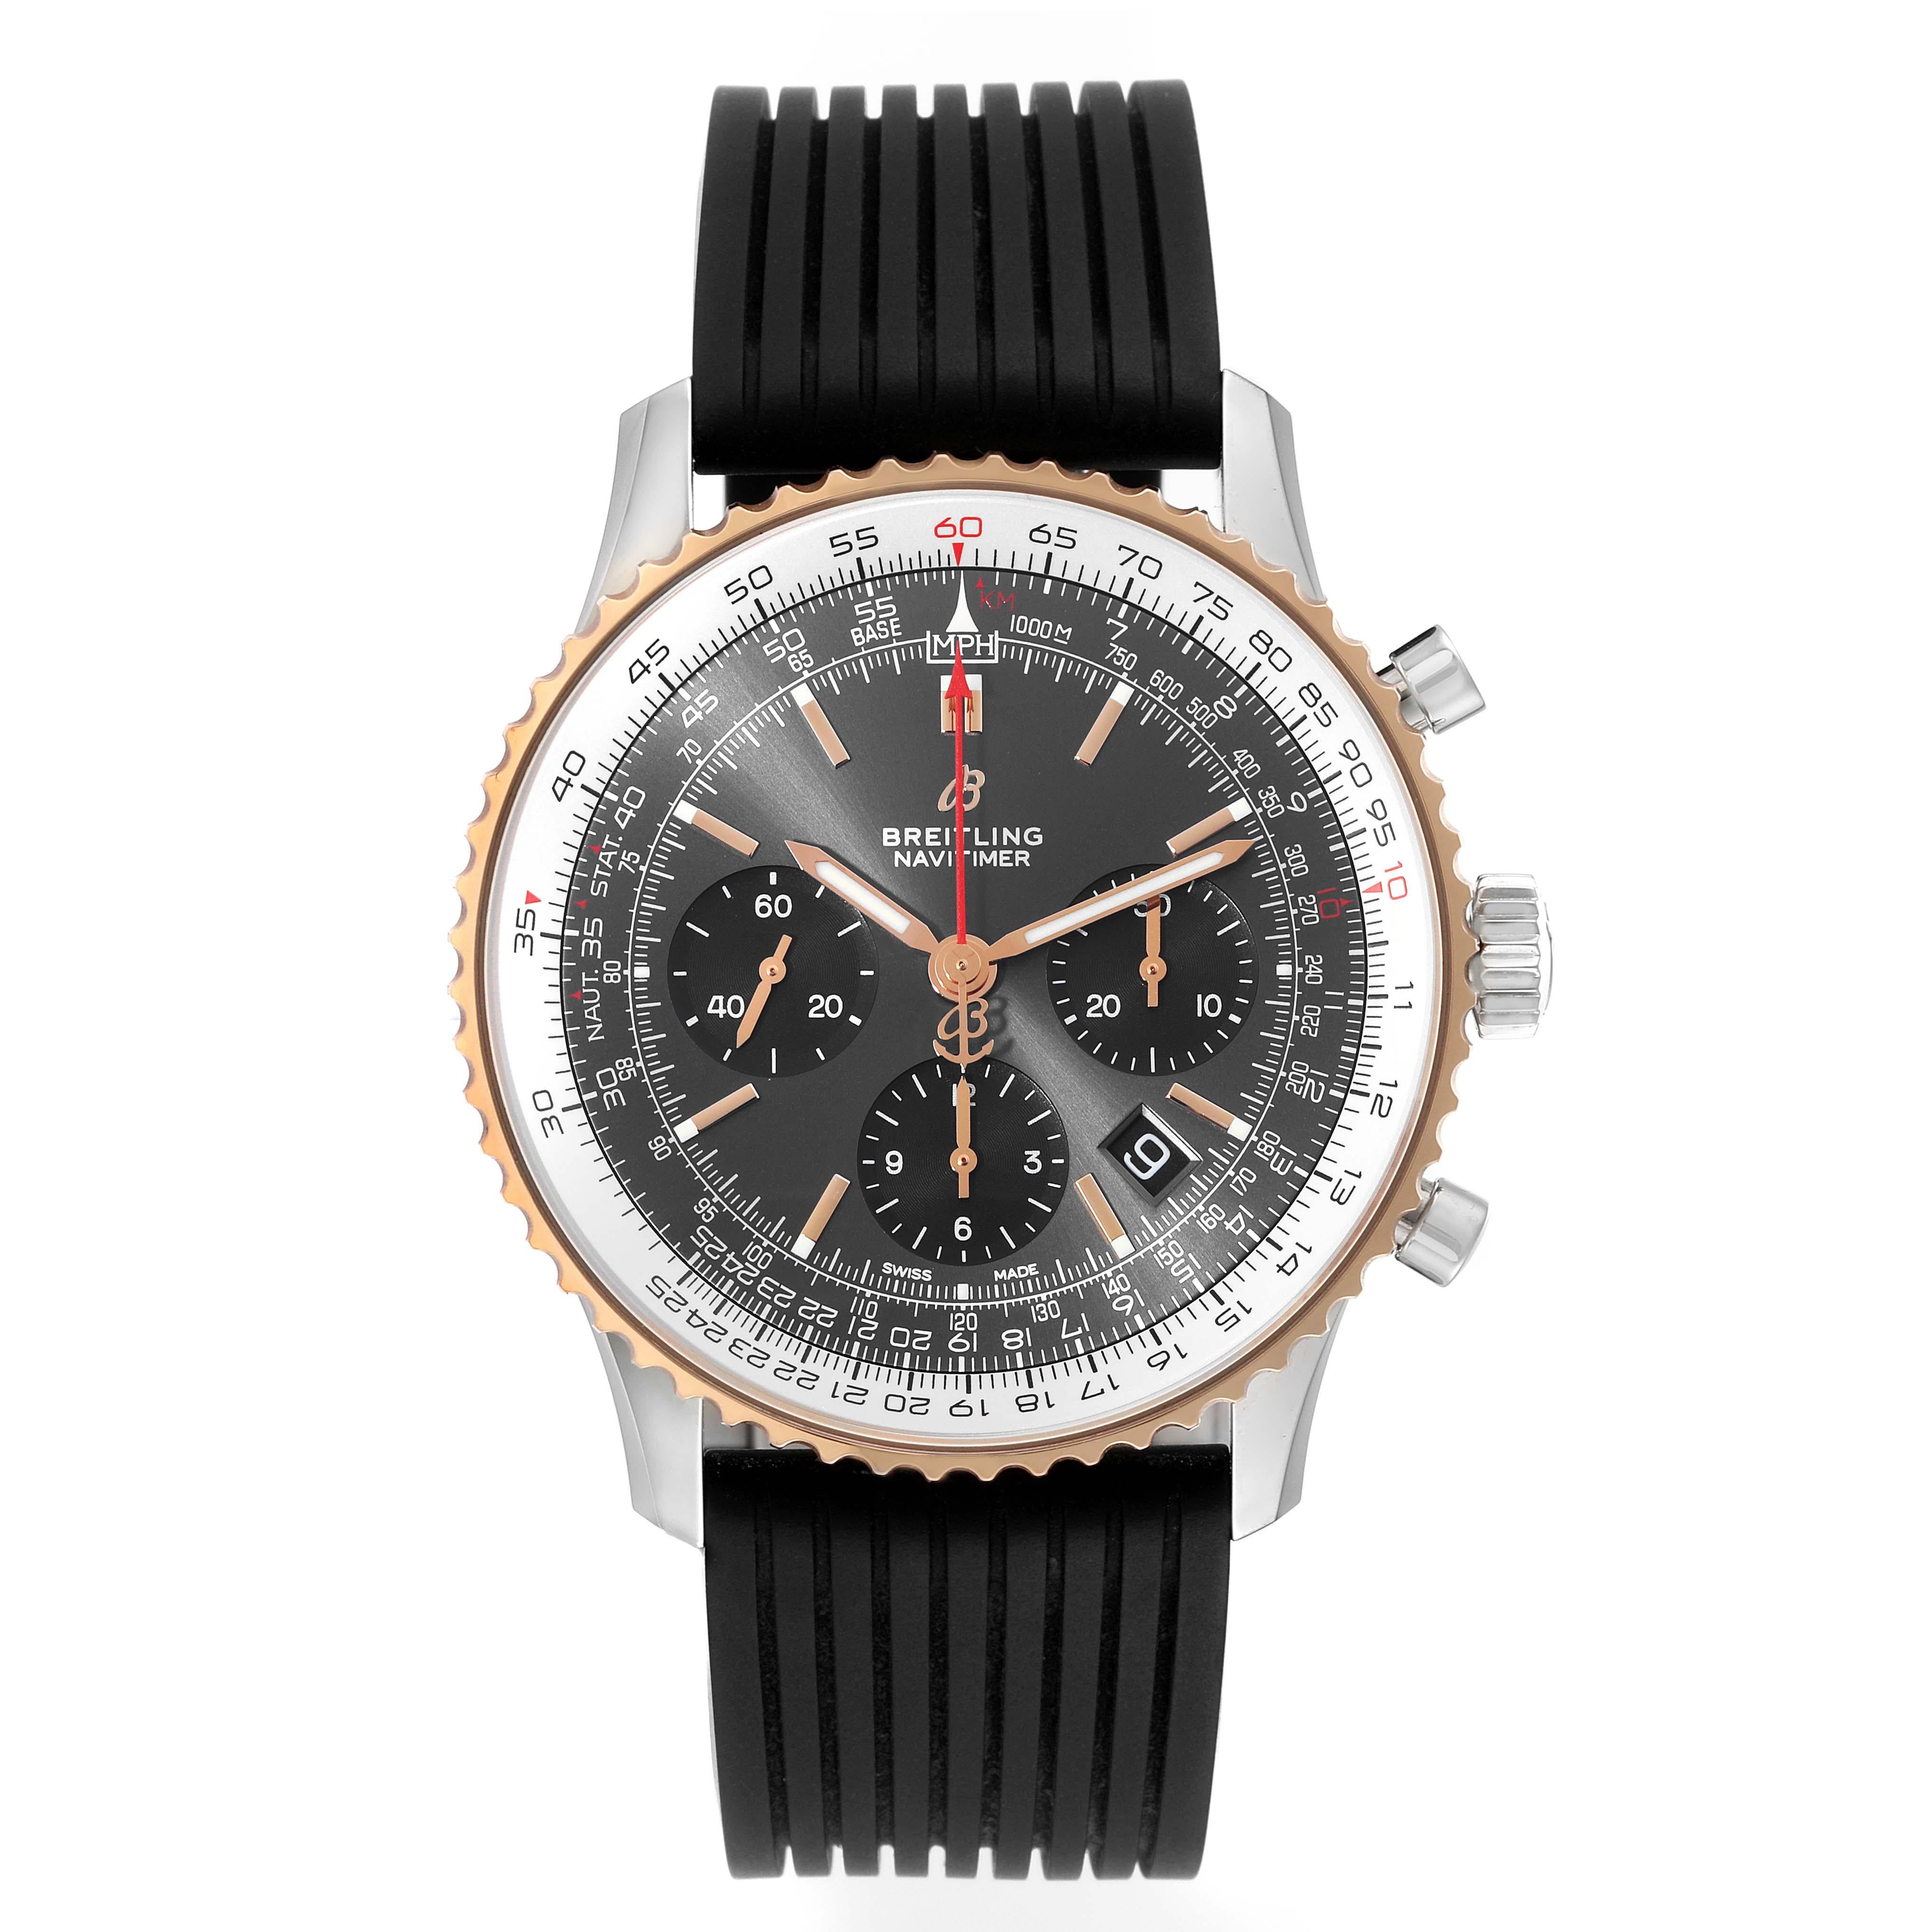 Breitling Navitimer 01 Grey Dial Steel Rose Gold Mens Watch UB0121 Box Card. Self-winding automatic officially certified chronometer movement. Chronograph function. Stainless steel case 42 mm in diameter.  Transparent exhibition sapphire crystal